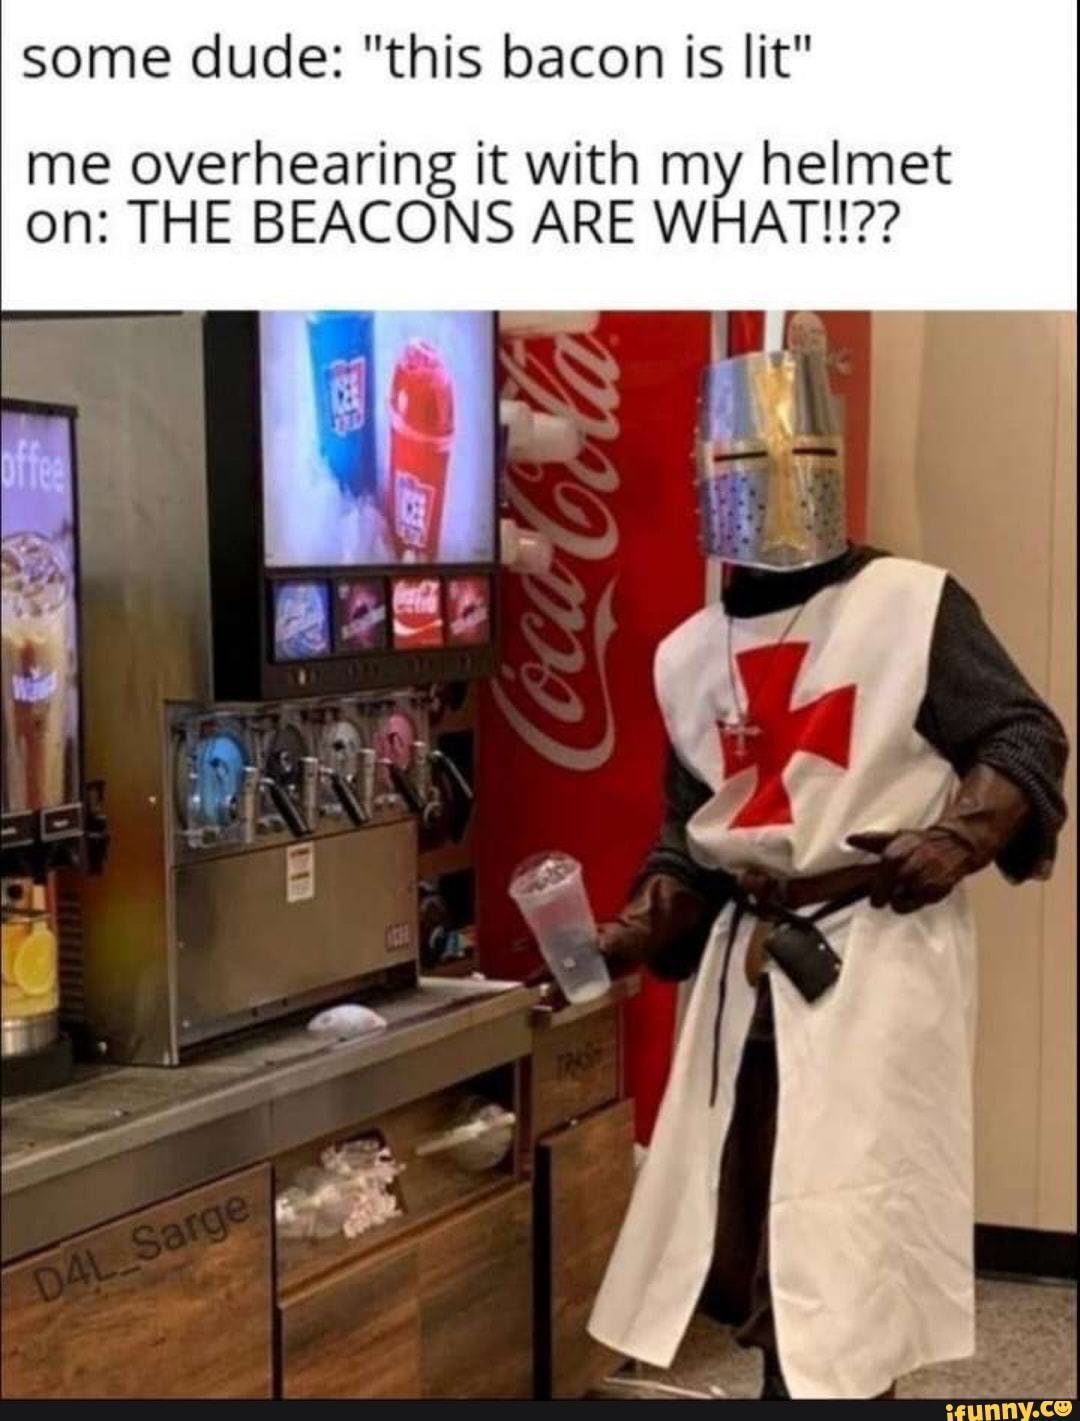 25 Best Memes About The Beacons Are Lit The Beacons Are Lit